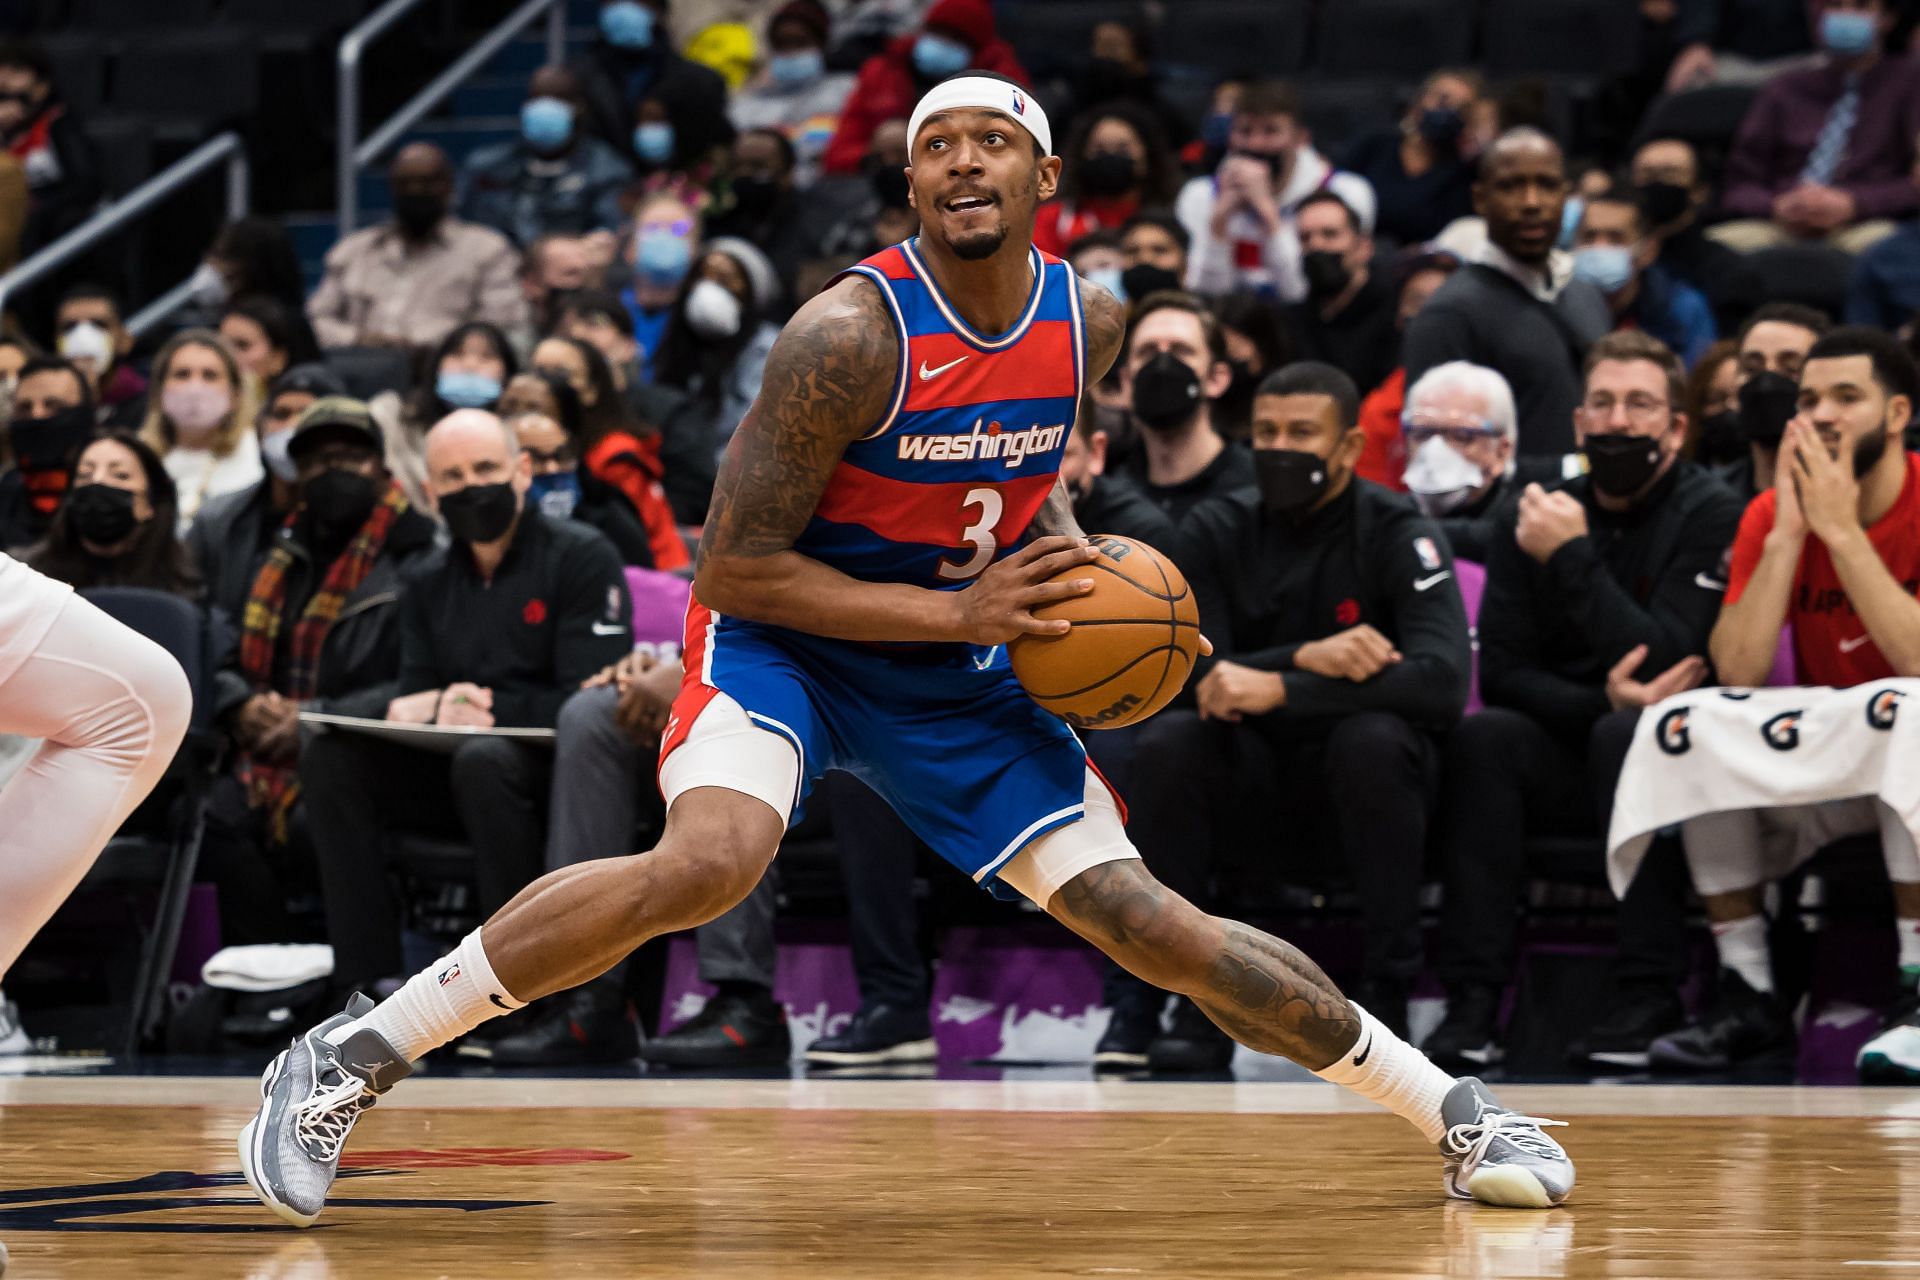 Bradley Beal declines player option with the Wizards, becomes